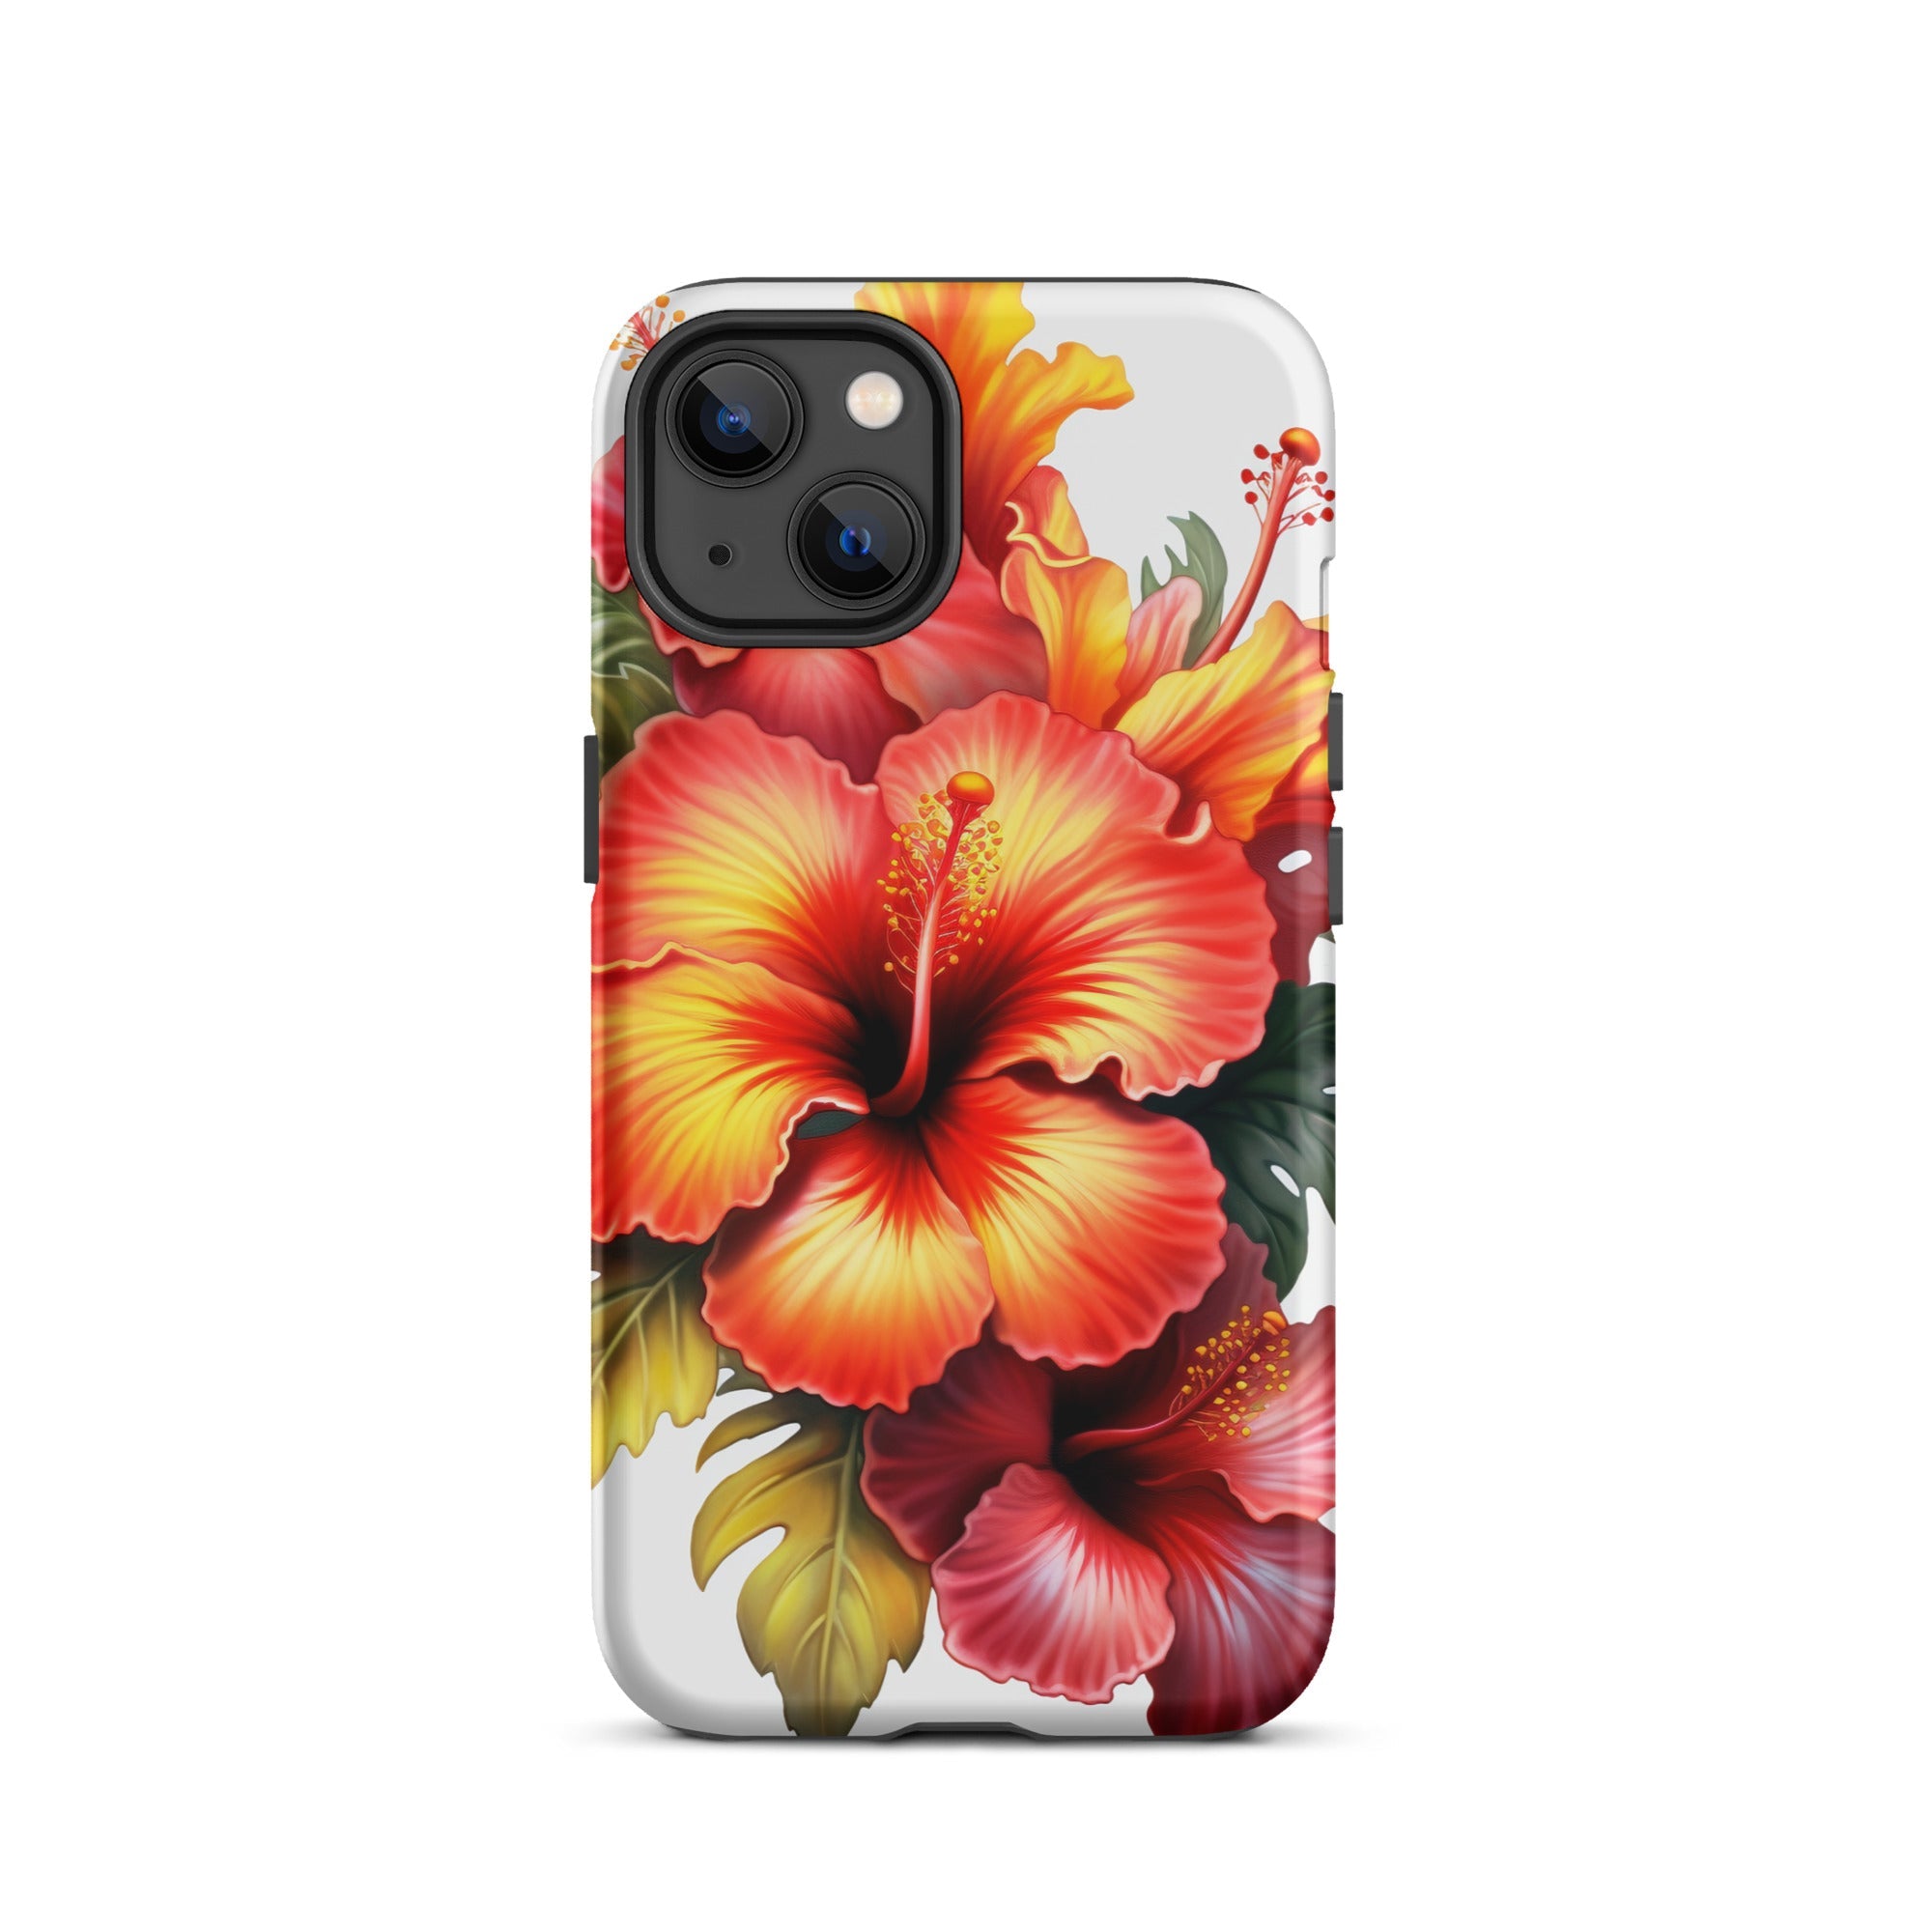 Hibiscus Flower iPhone Case by Visual Verse - Image 18